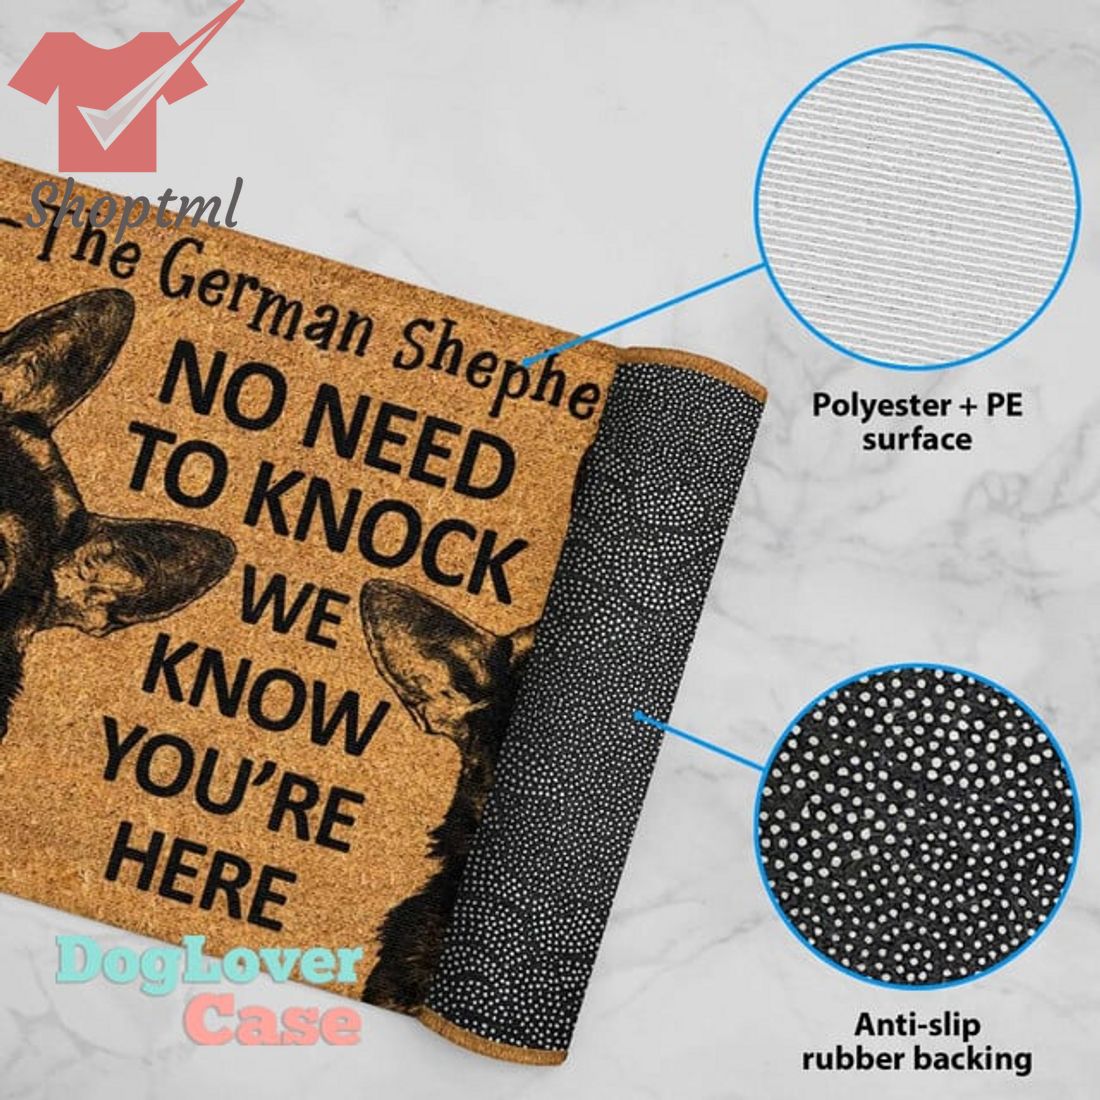 The German Shepherds No Need To Knock We Know You're Here Doormat